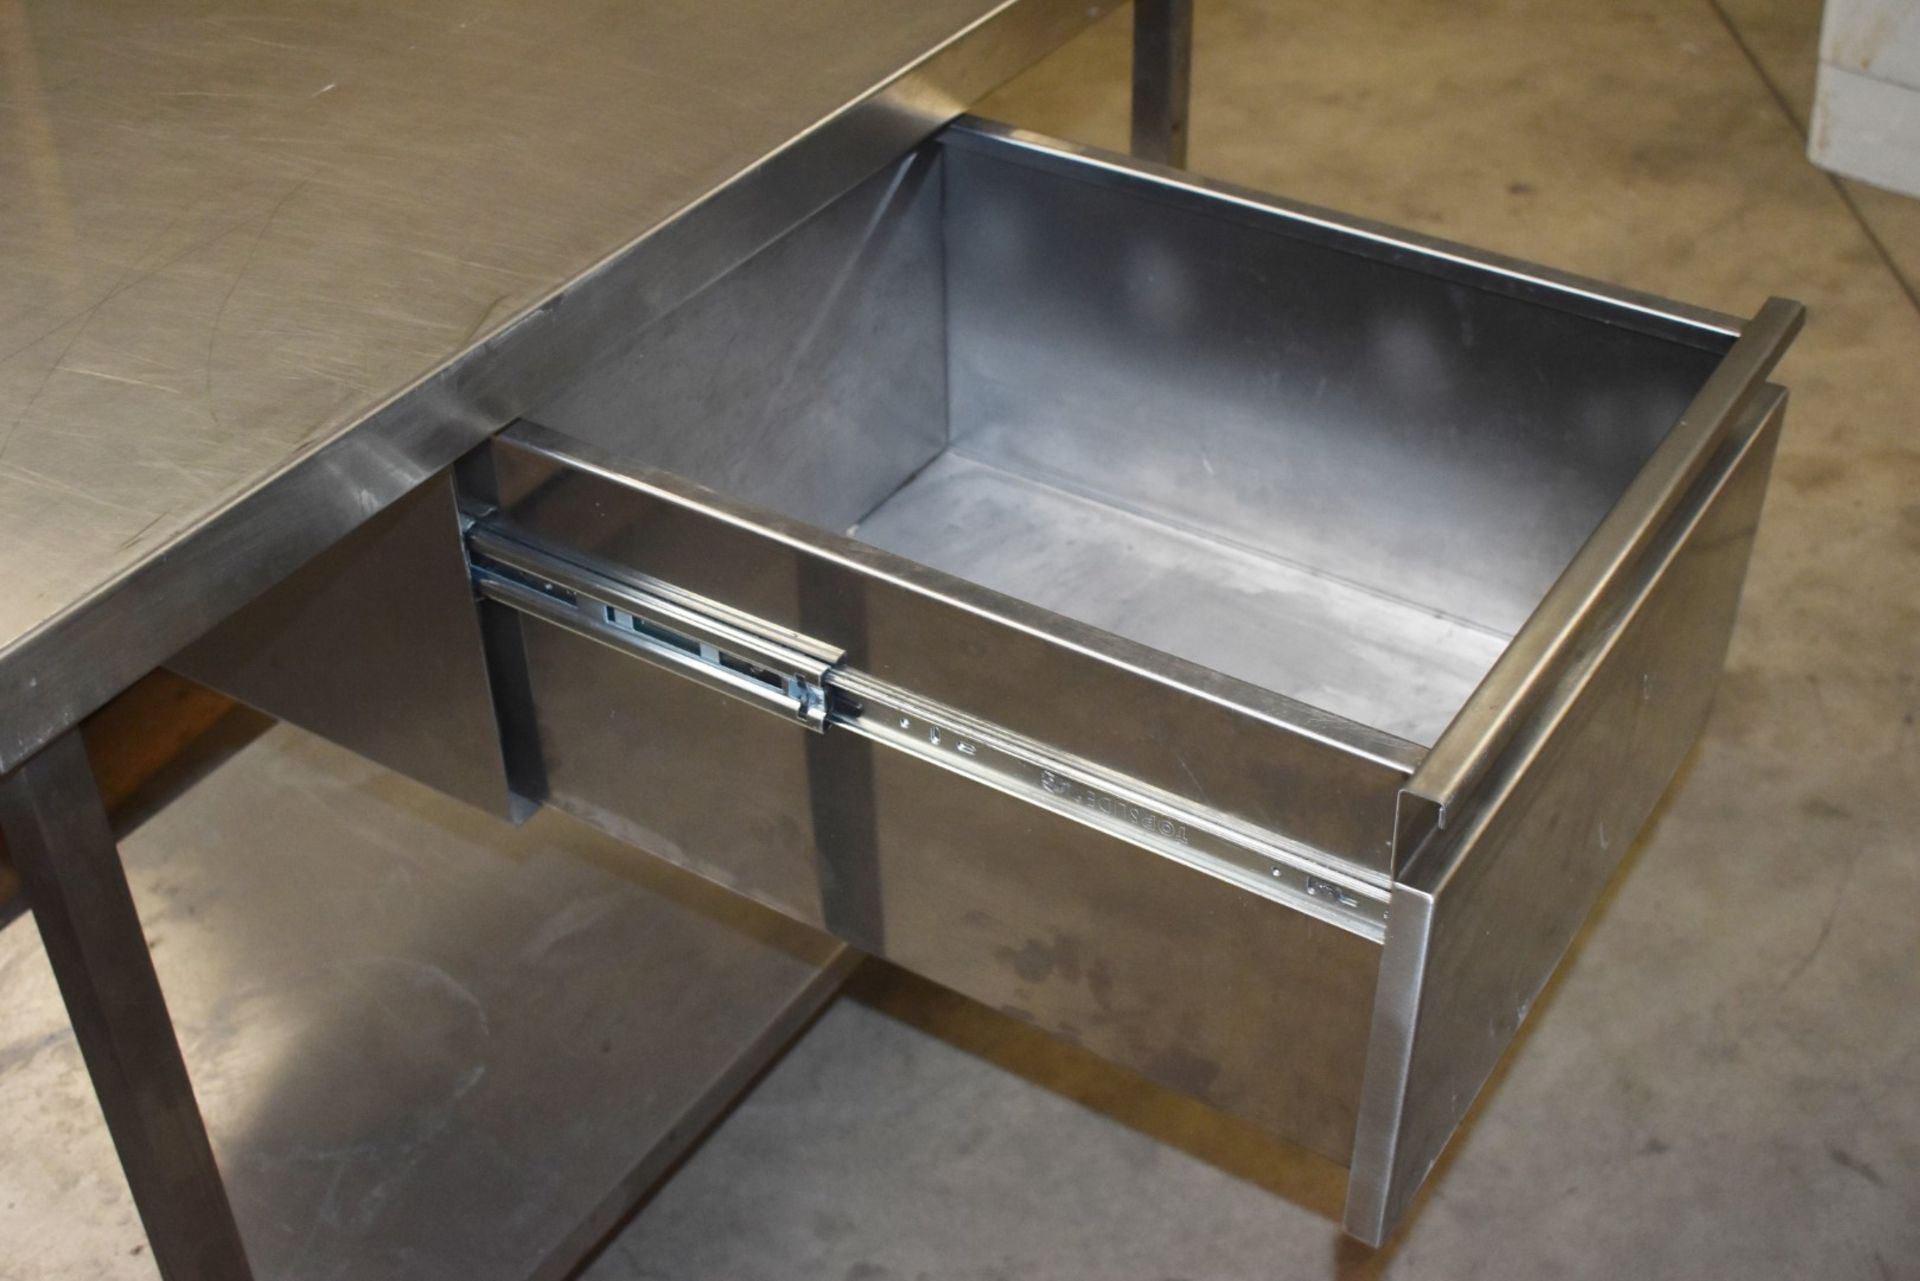 1 x Stainless Steel Prep Bench With Undershelf, Upstand and Central Drawer - H86 x W100 x D70 - Image 4 of 6